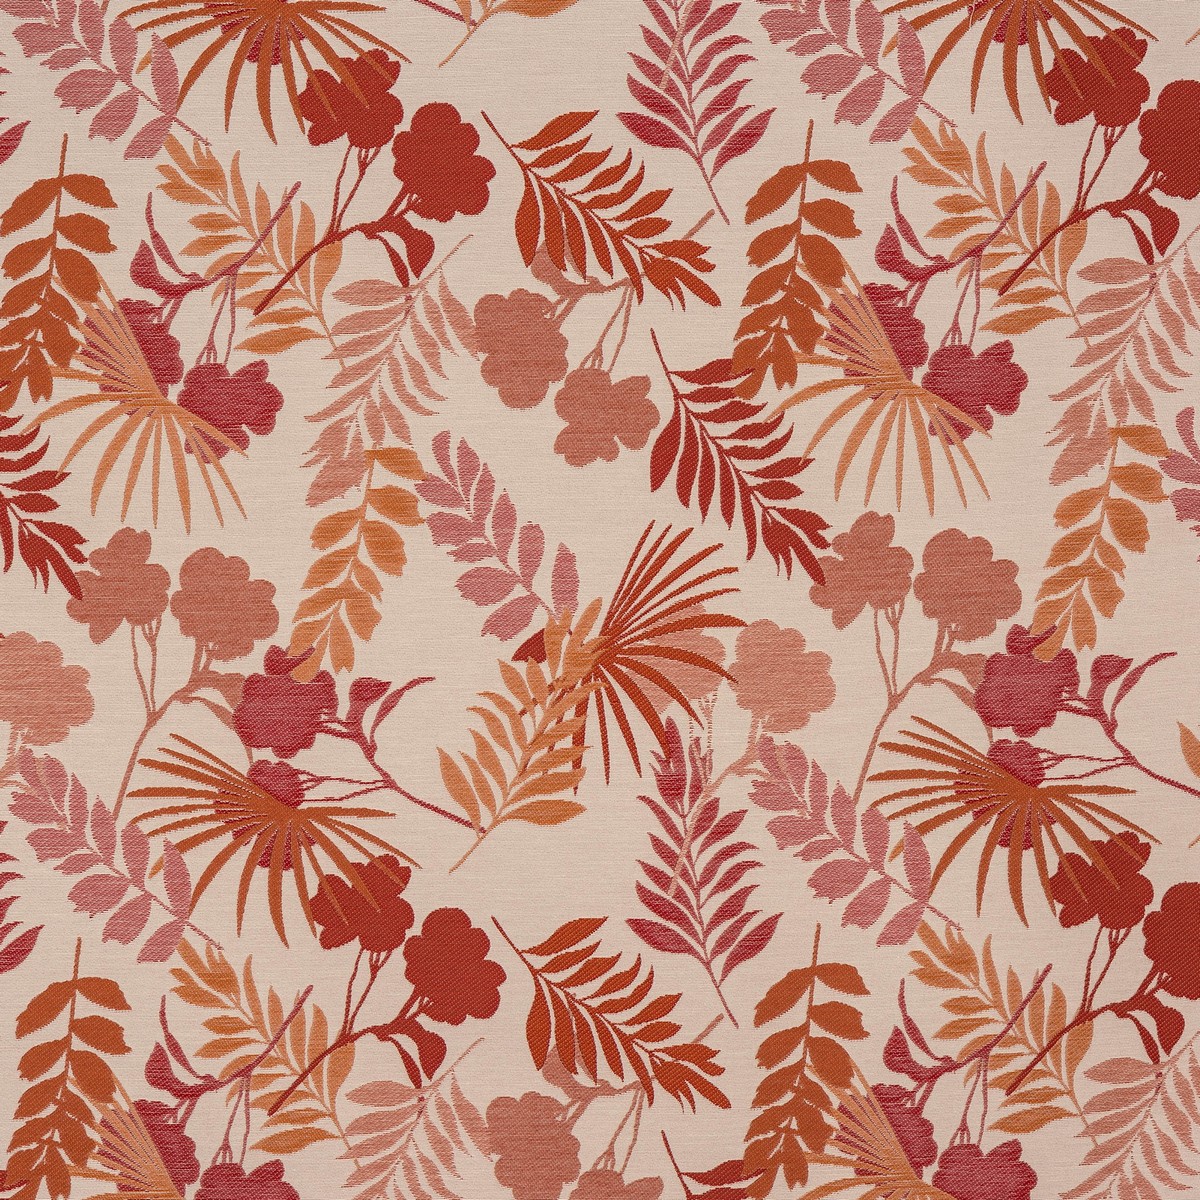 Werner Spice Fabric by Porter & Stone